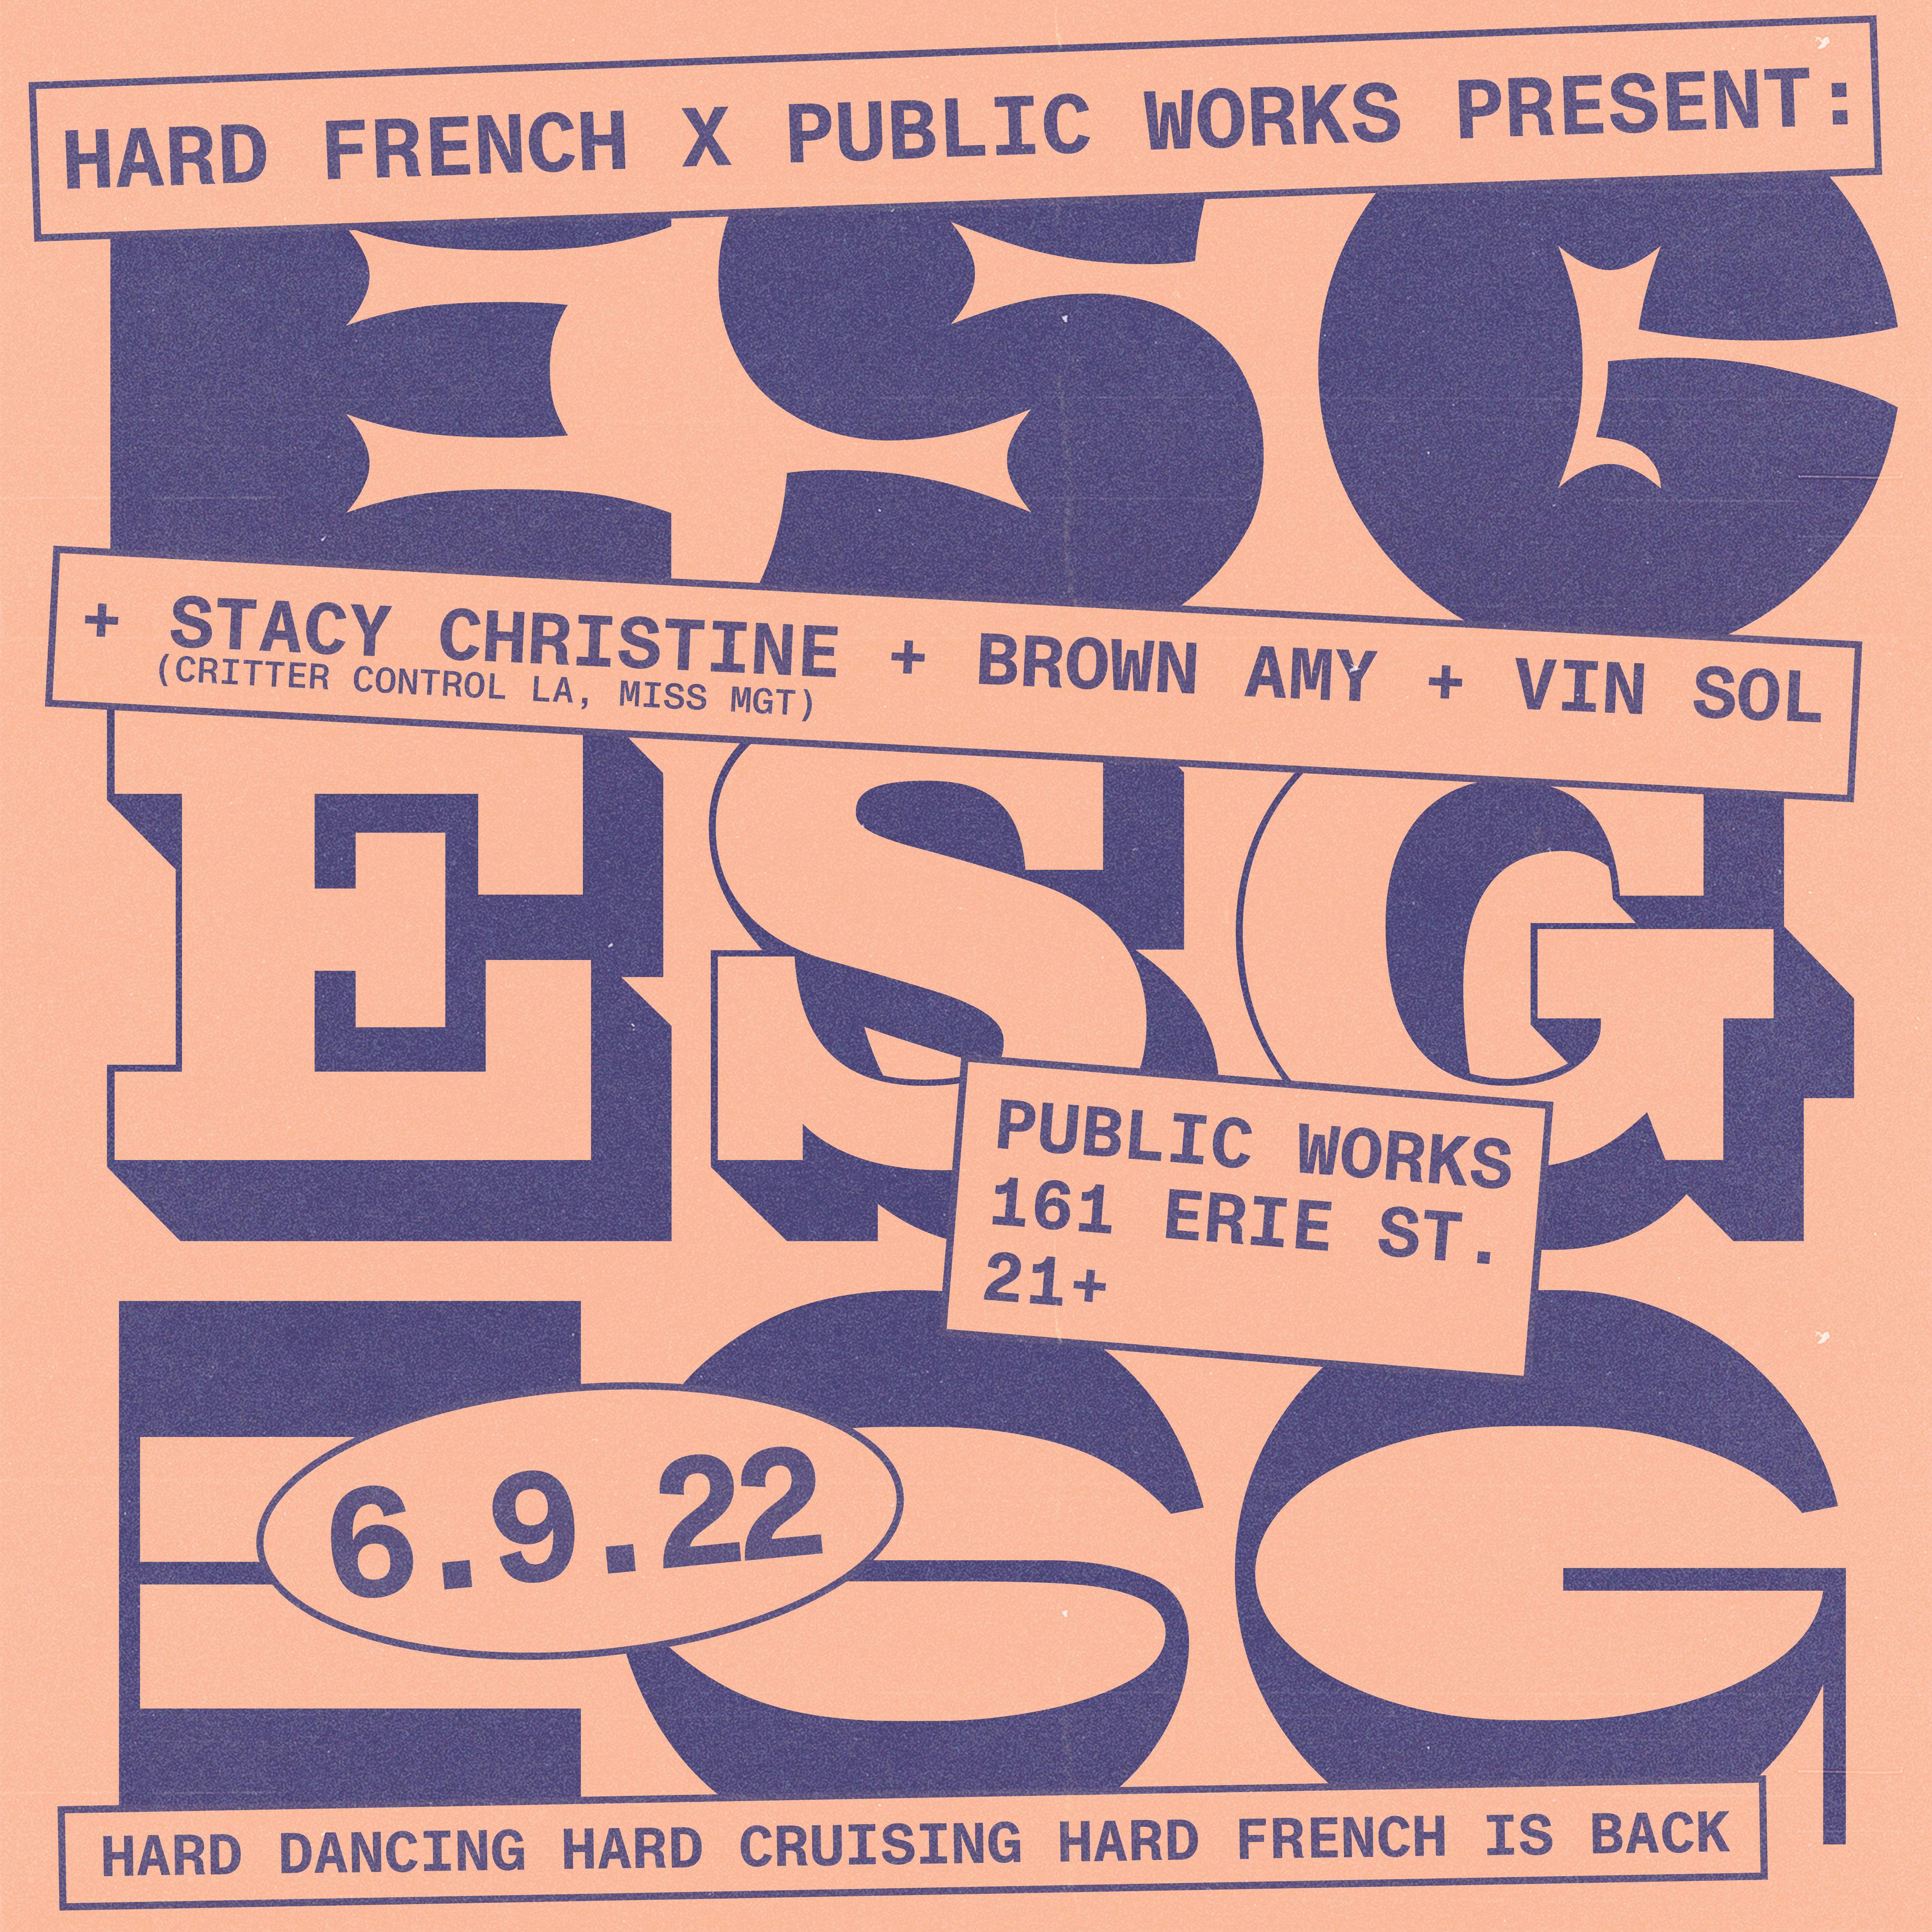 ESG presented by Hard French & Public Works - フライヤー表